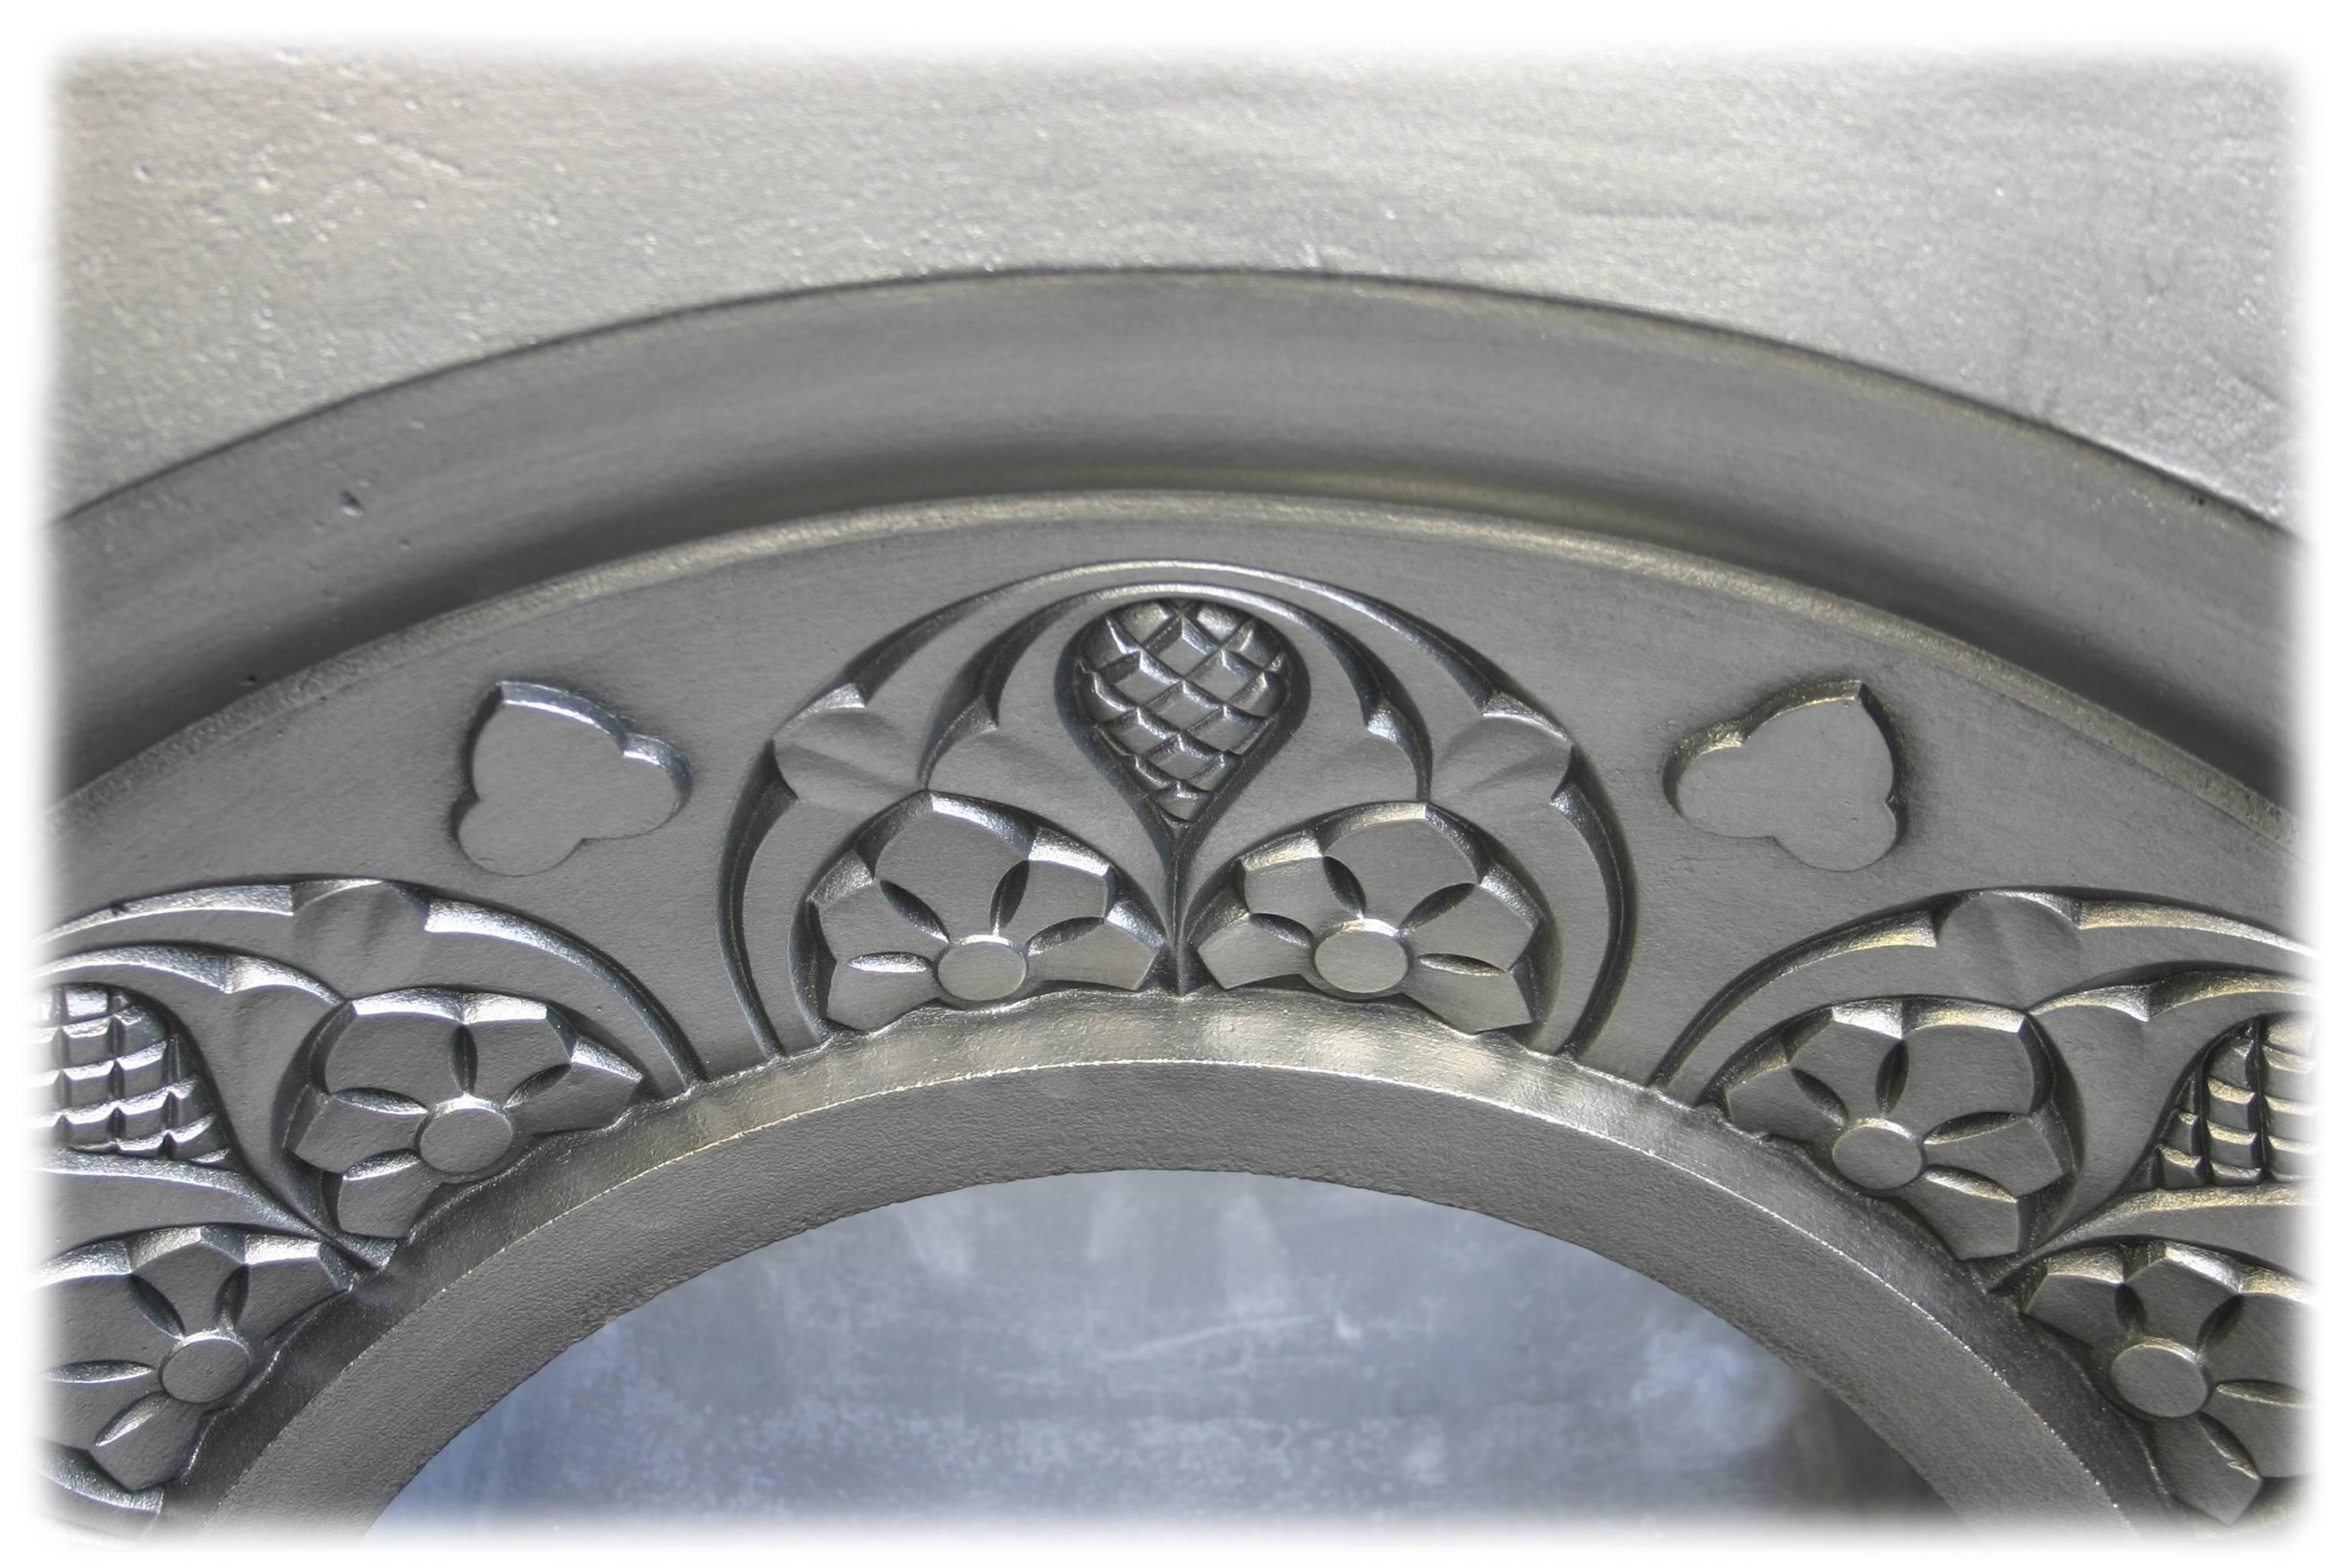 19th century Victorian arched cast iron fire insert with bold ornate detail framing the arched and more unusually in the spandrels too, circa 1870. 
Fully restored and finished with traditional black grate polish, it is ready for a solid fuel coal